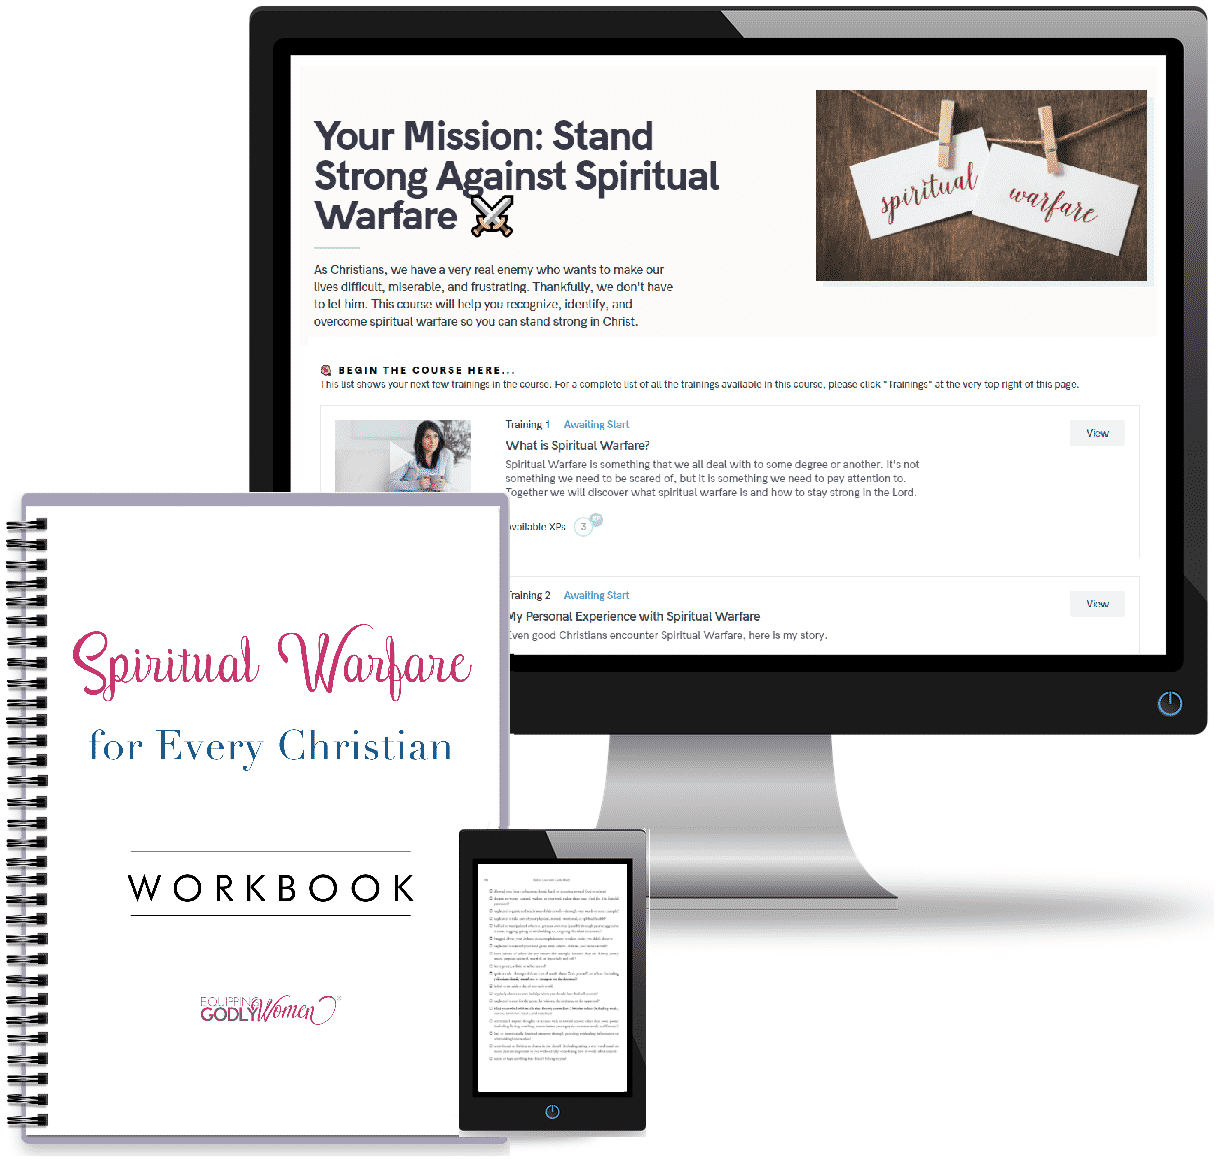 Spiritual Warfare for Every Christian Workbook and Shown on a Computer